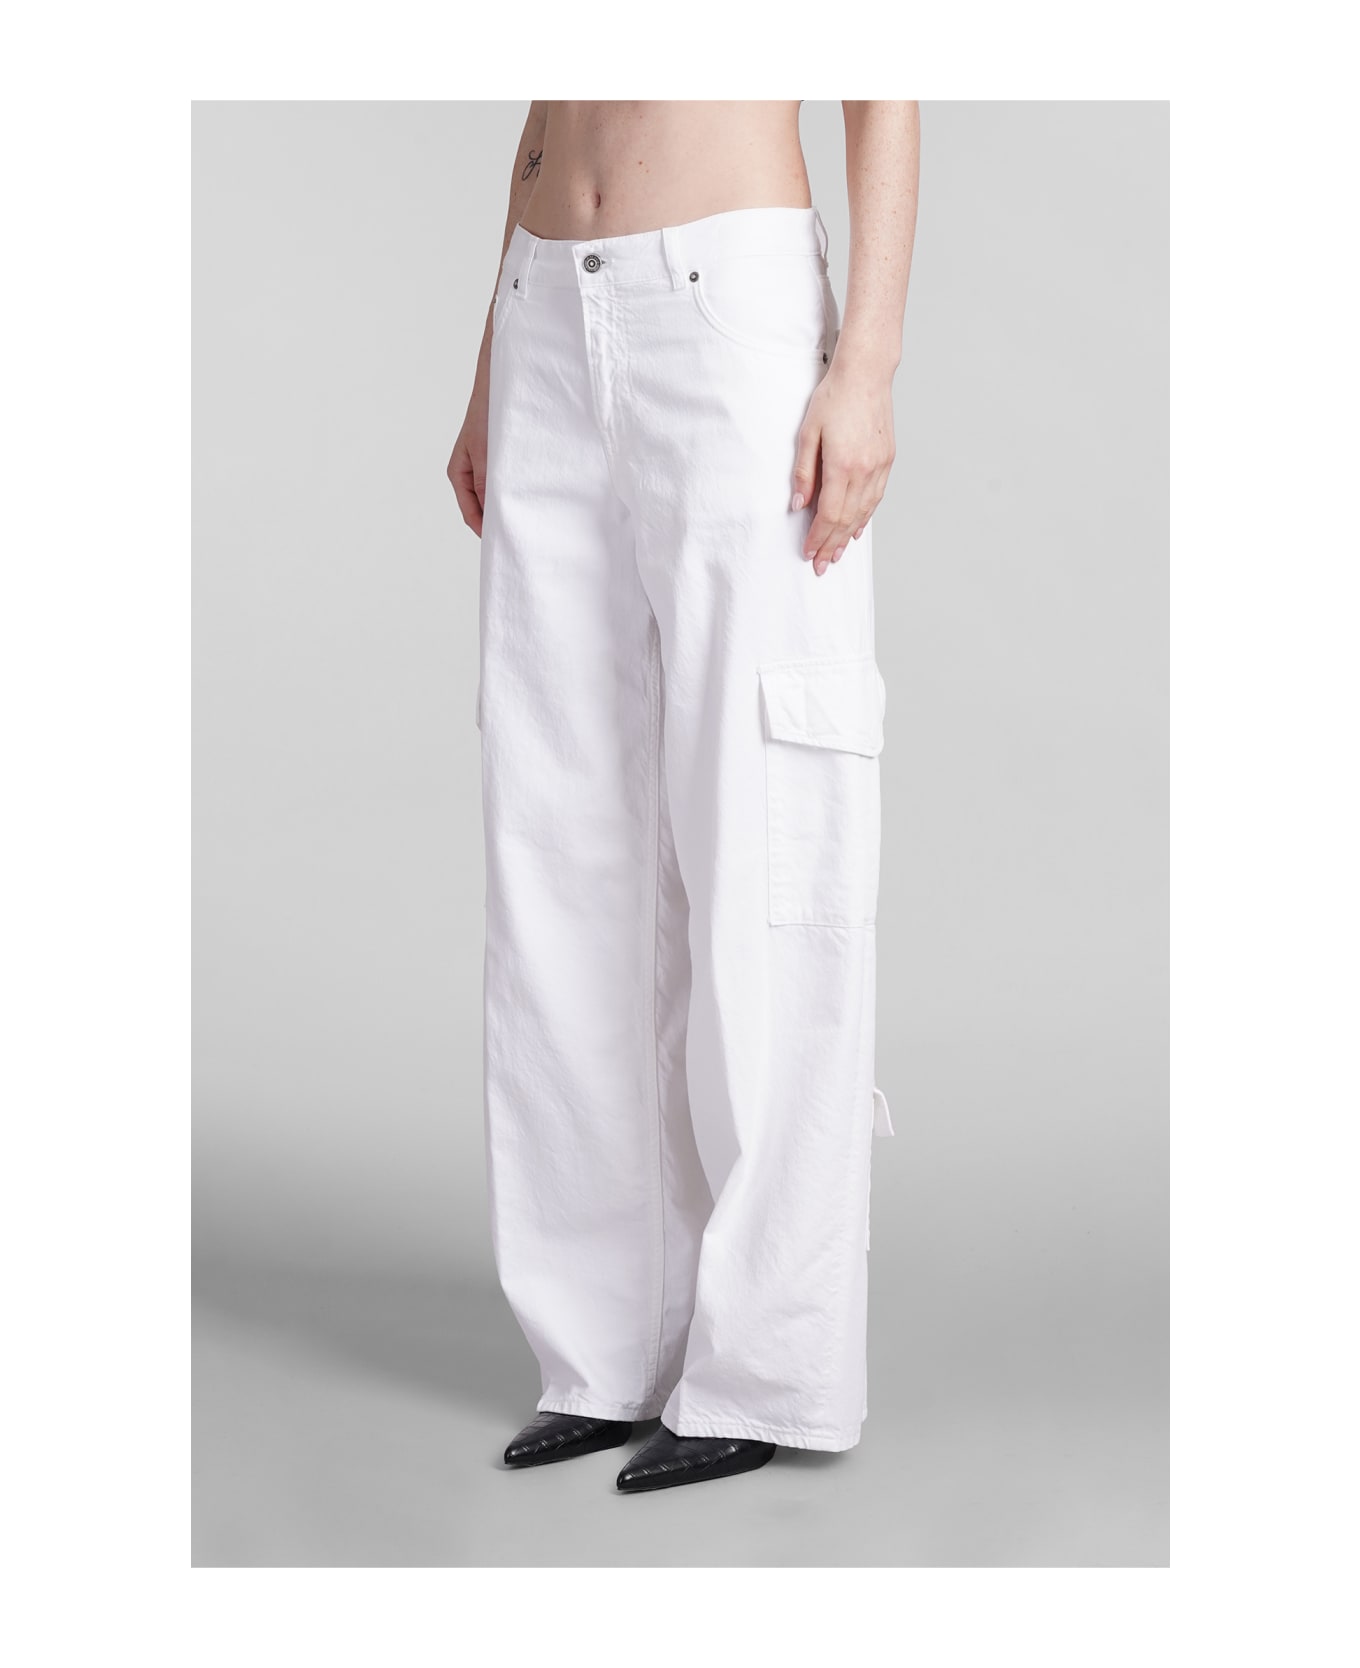 Haikure Bethany Jeans In White Cotton - white ボトムス